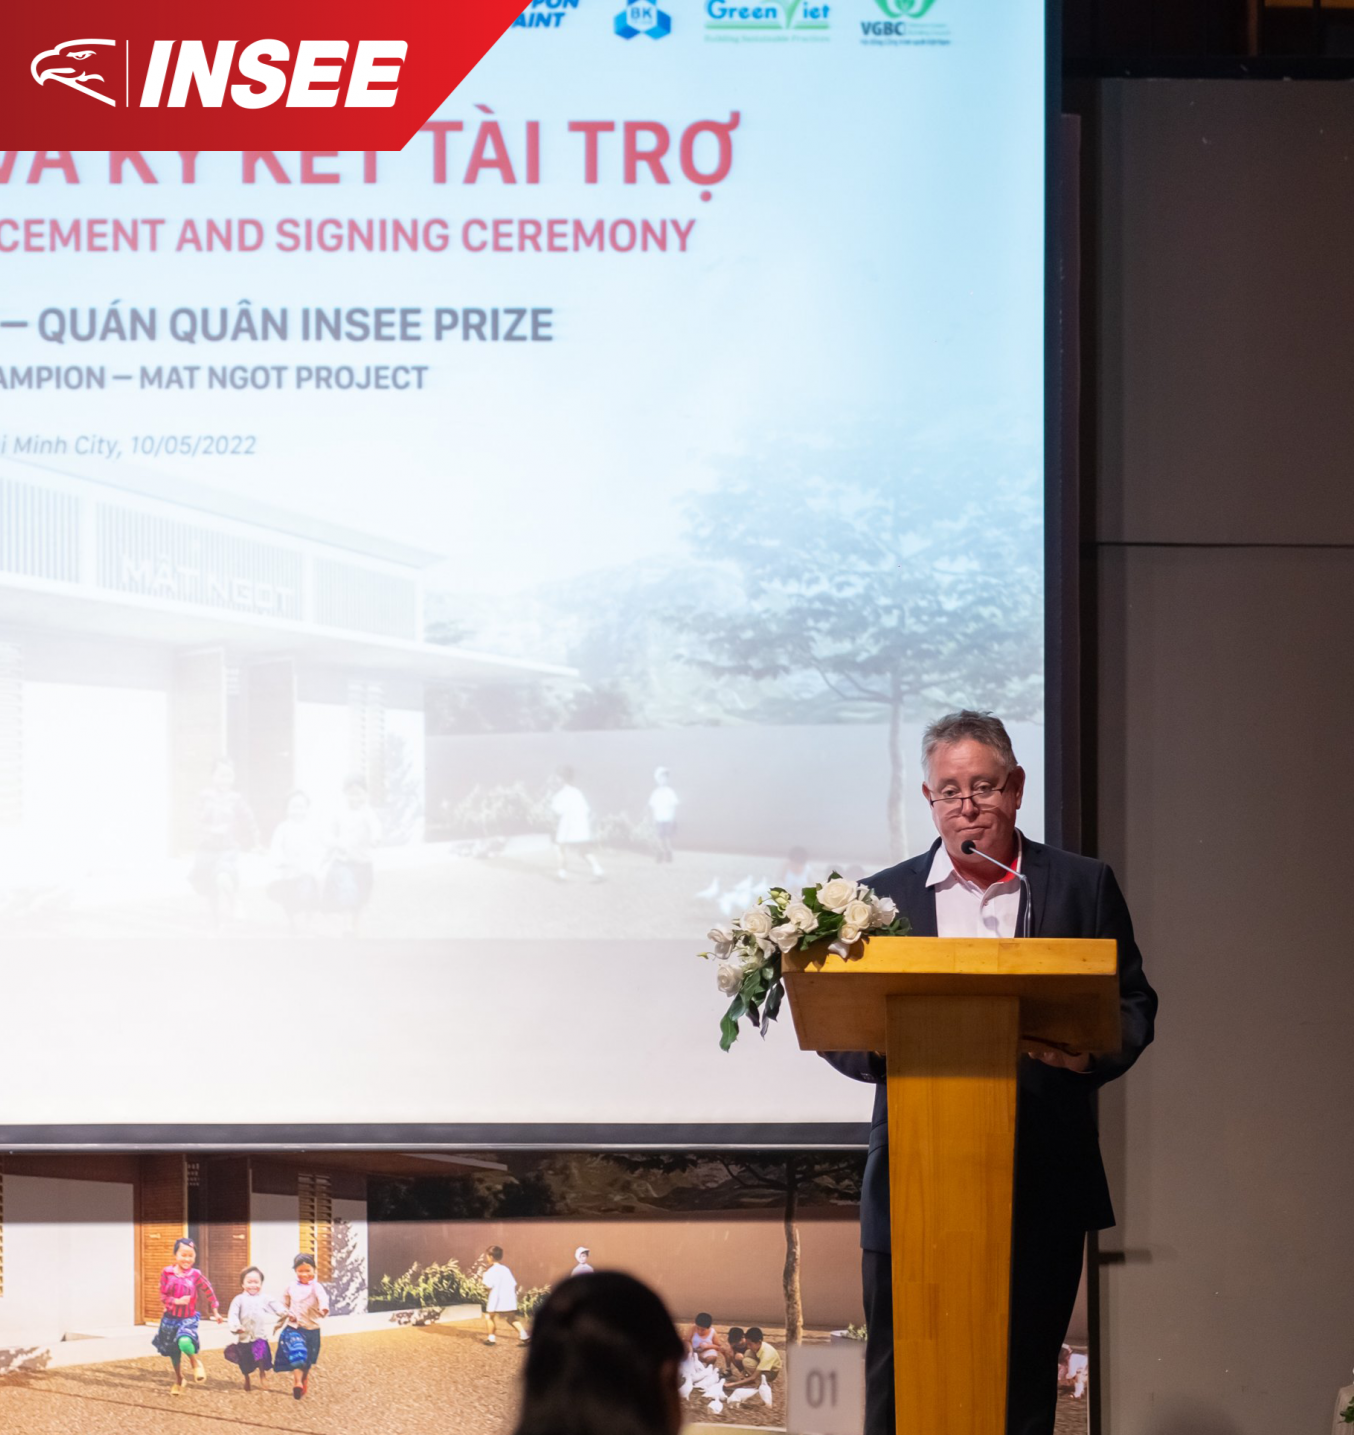 Starting journey to actualise the "Mật ngọt" project - INSEE prize champion